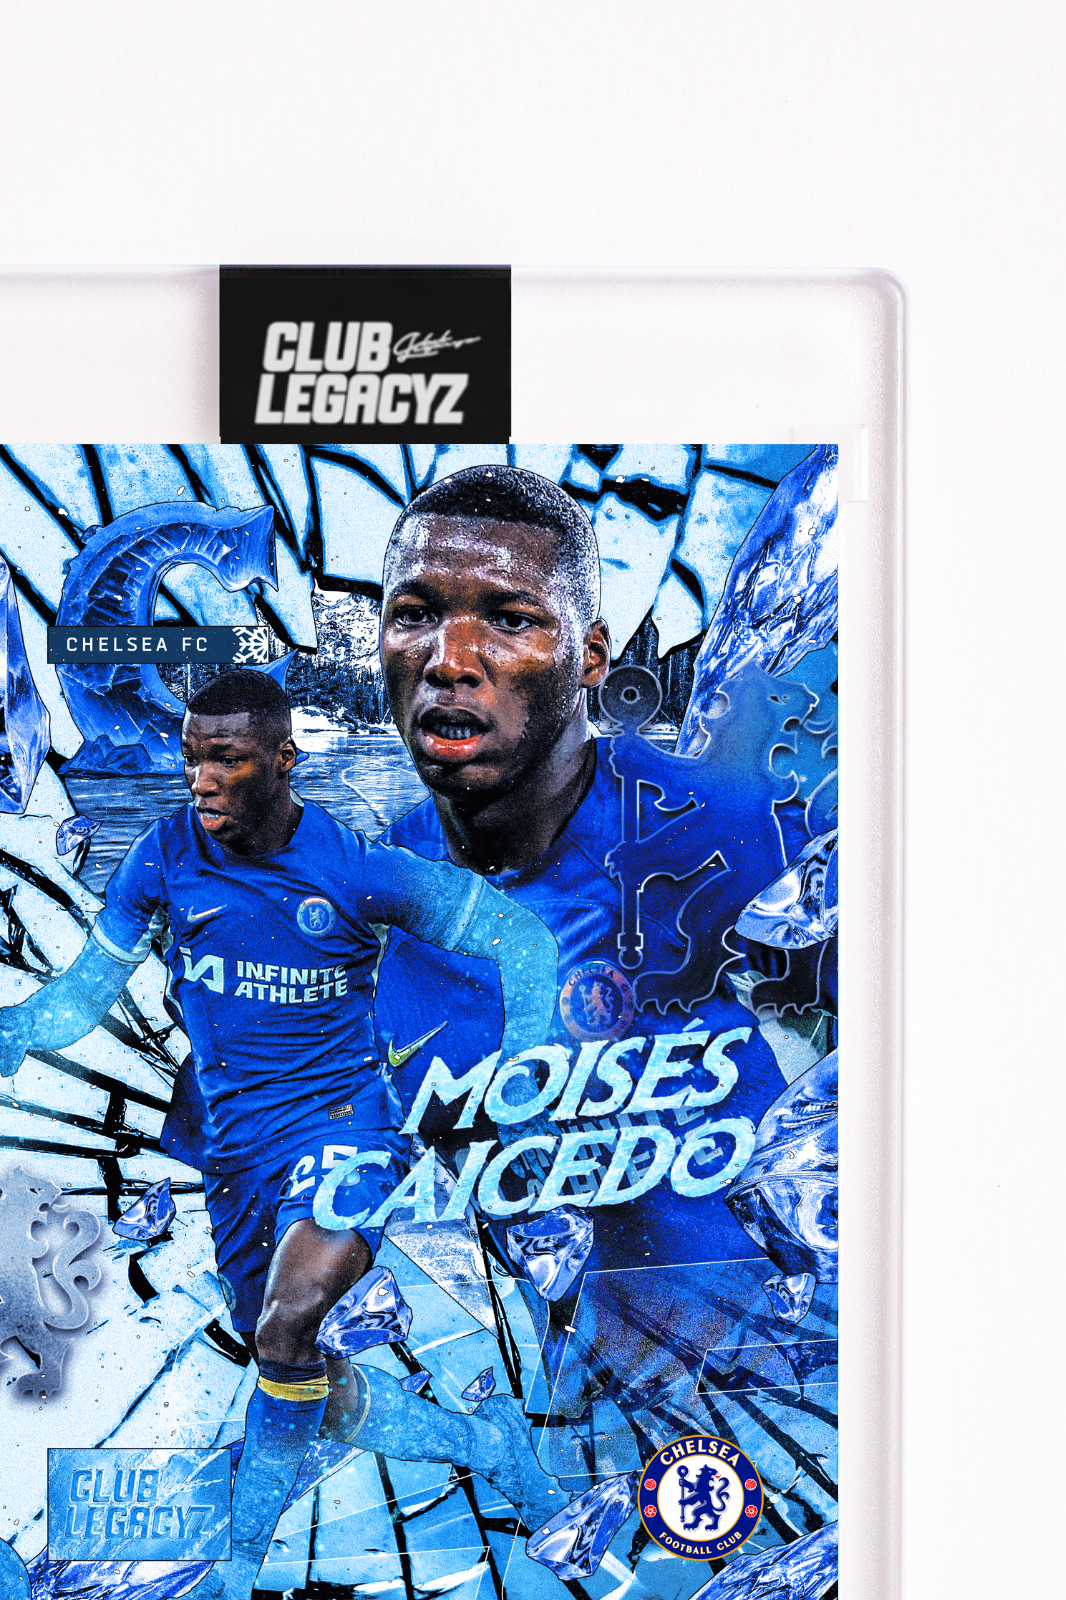 Chelsea FC - Moisés Caicedo Frozen Icon limited to 100